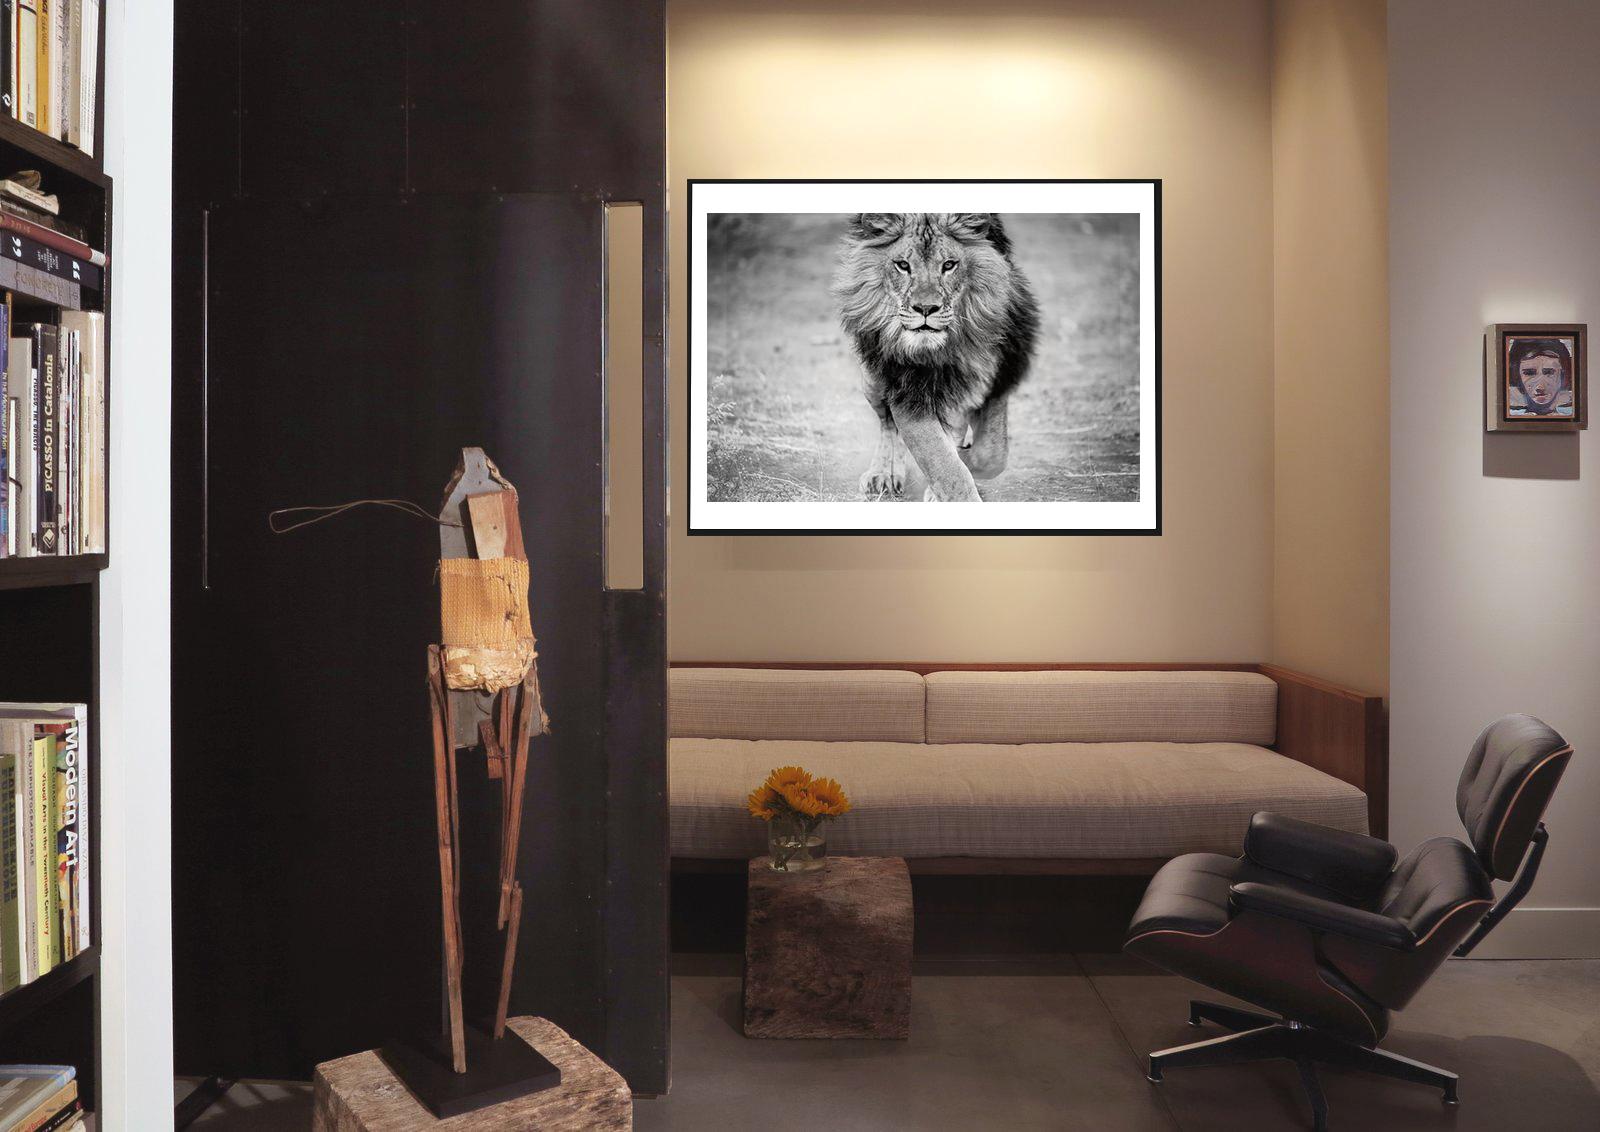 This is a contemporary photograph of an African Lion. 

Printed on archival paper and using archival inks
Framing available. Inquire for rates. 

Shane Russeck has built a reputation for capturing America's landscapes, cultures and endangered